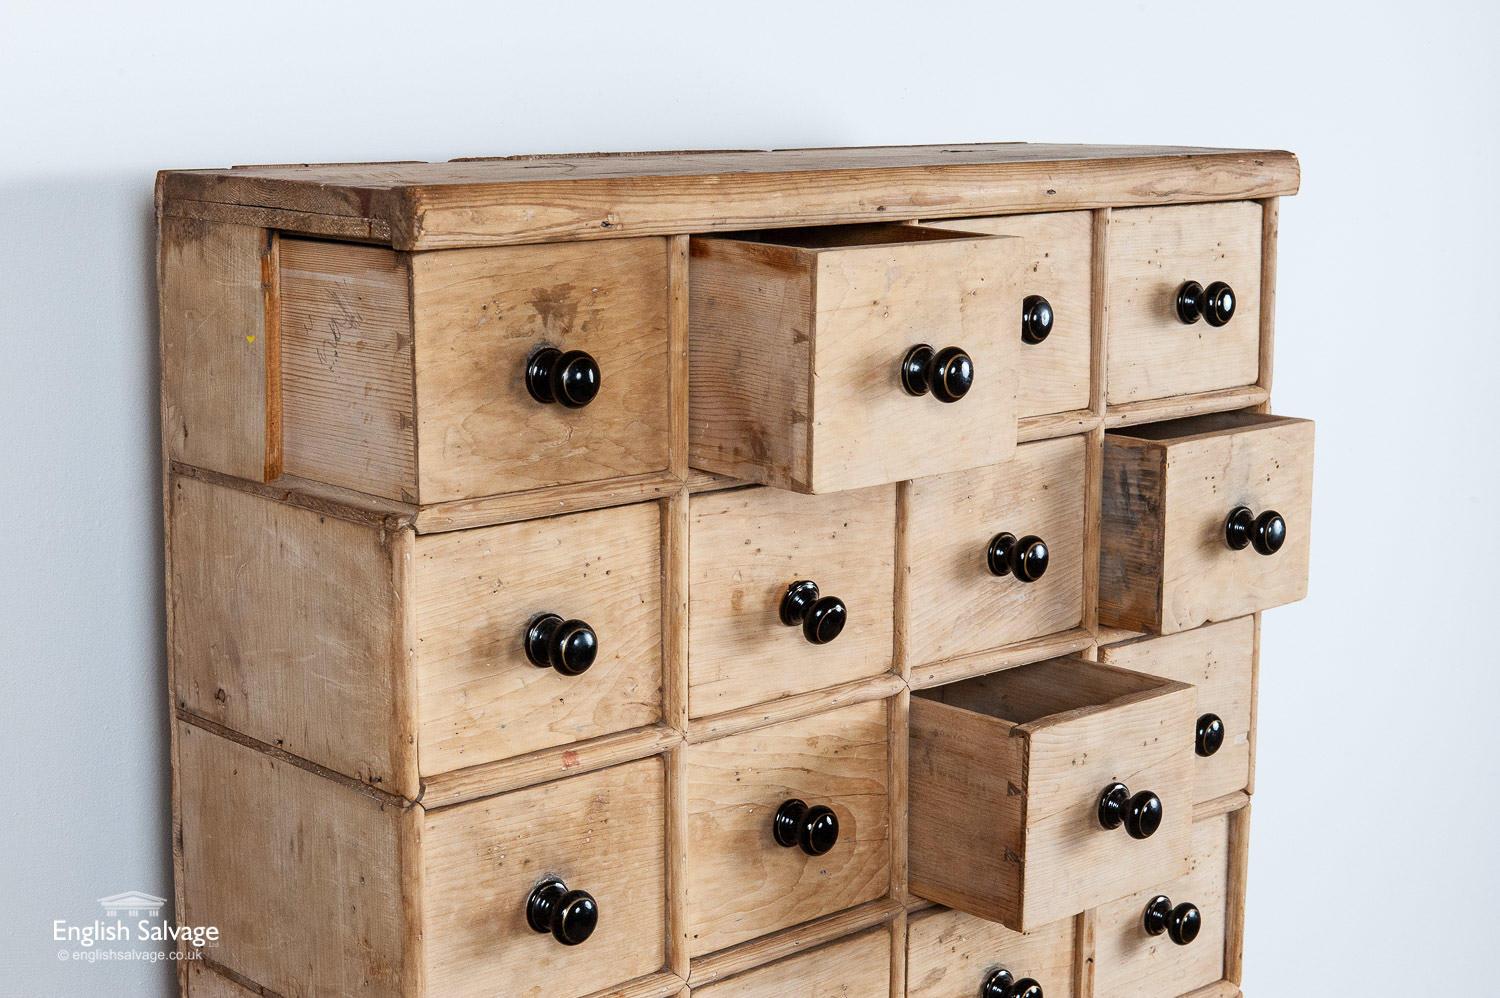 This reclaimed bank of 48 small drawers in pitched pine is built in layers with dovetail joints. The drawer handles are black ceramic knobs with gilt lines painted on. The wood is weathered with scratches and chips and what look like pin holes